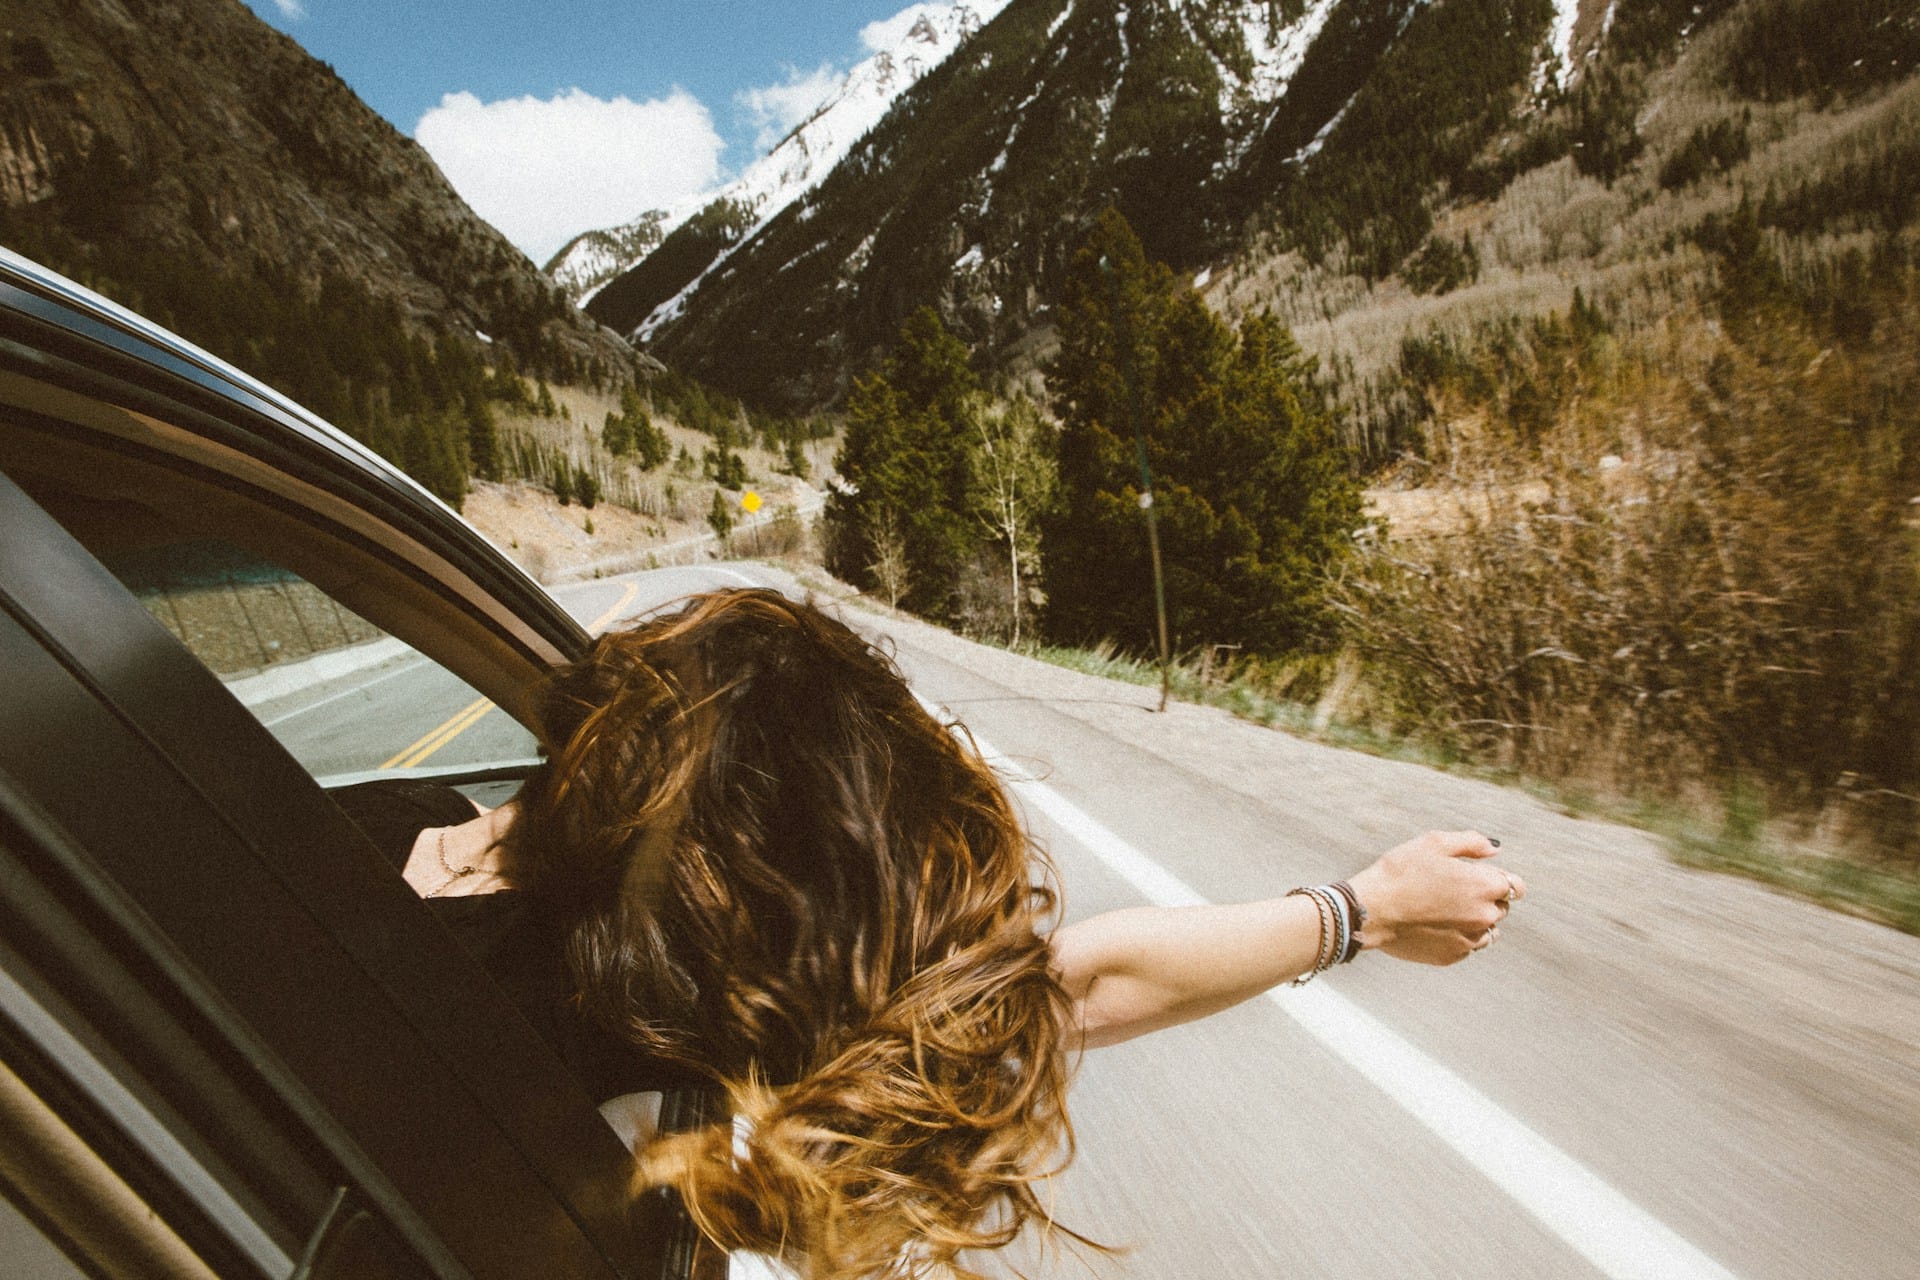 woman leaning out of a car window and enjoying the wind on her face on a road flanked by mountains